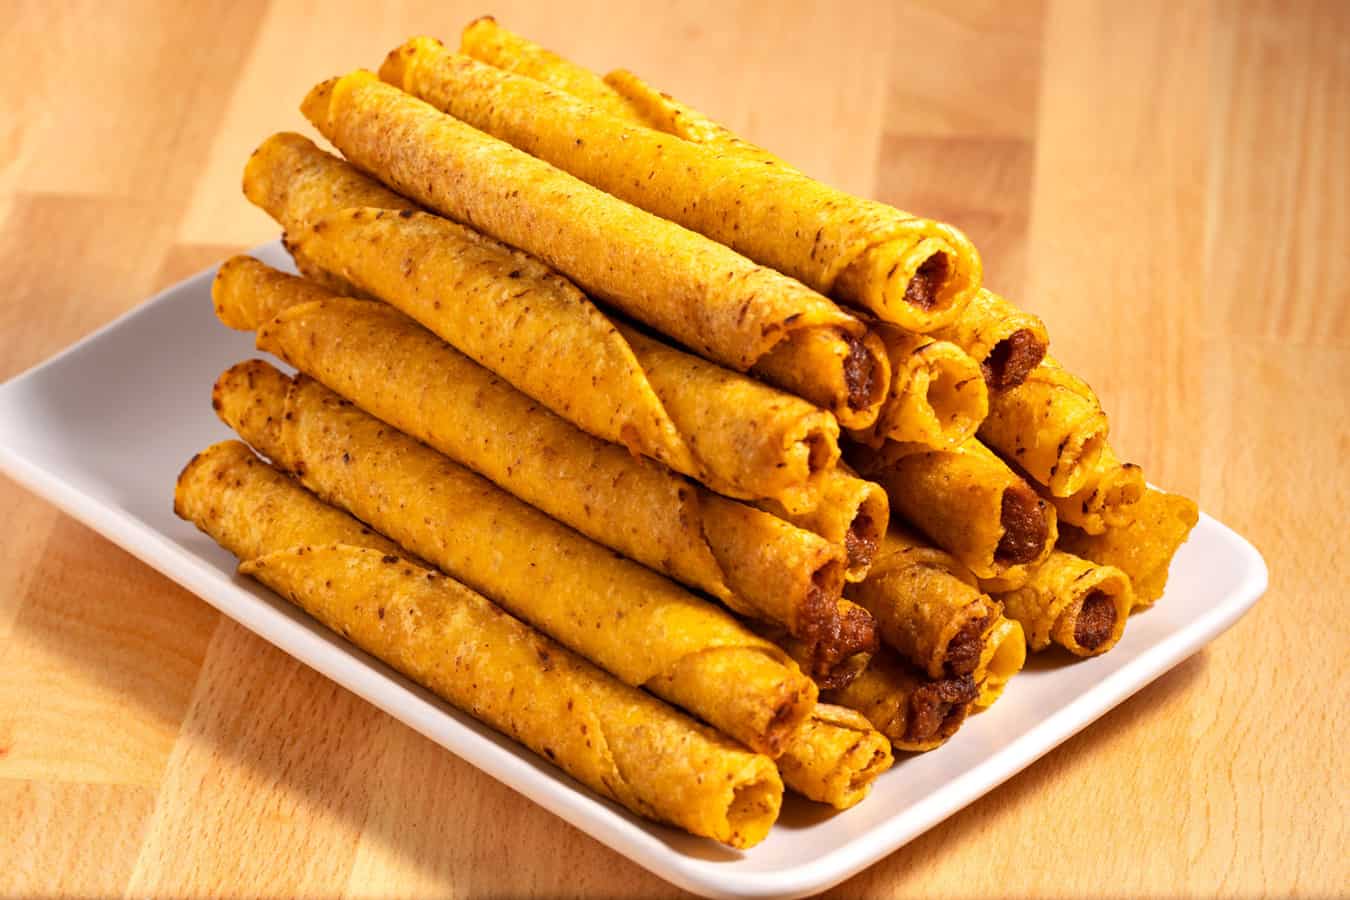 Taquito stack on a plate.